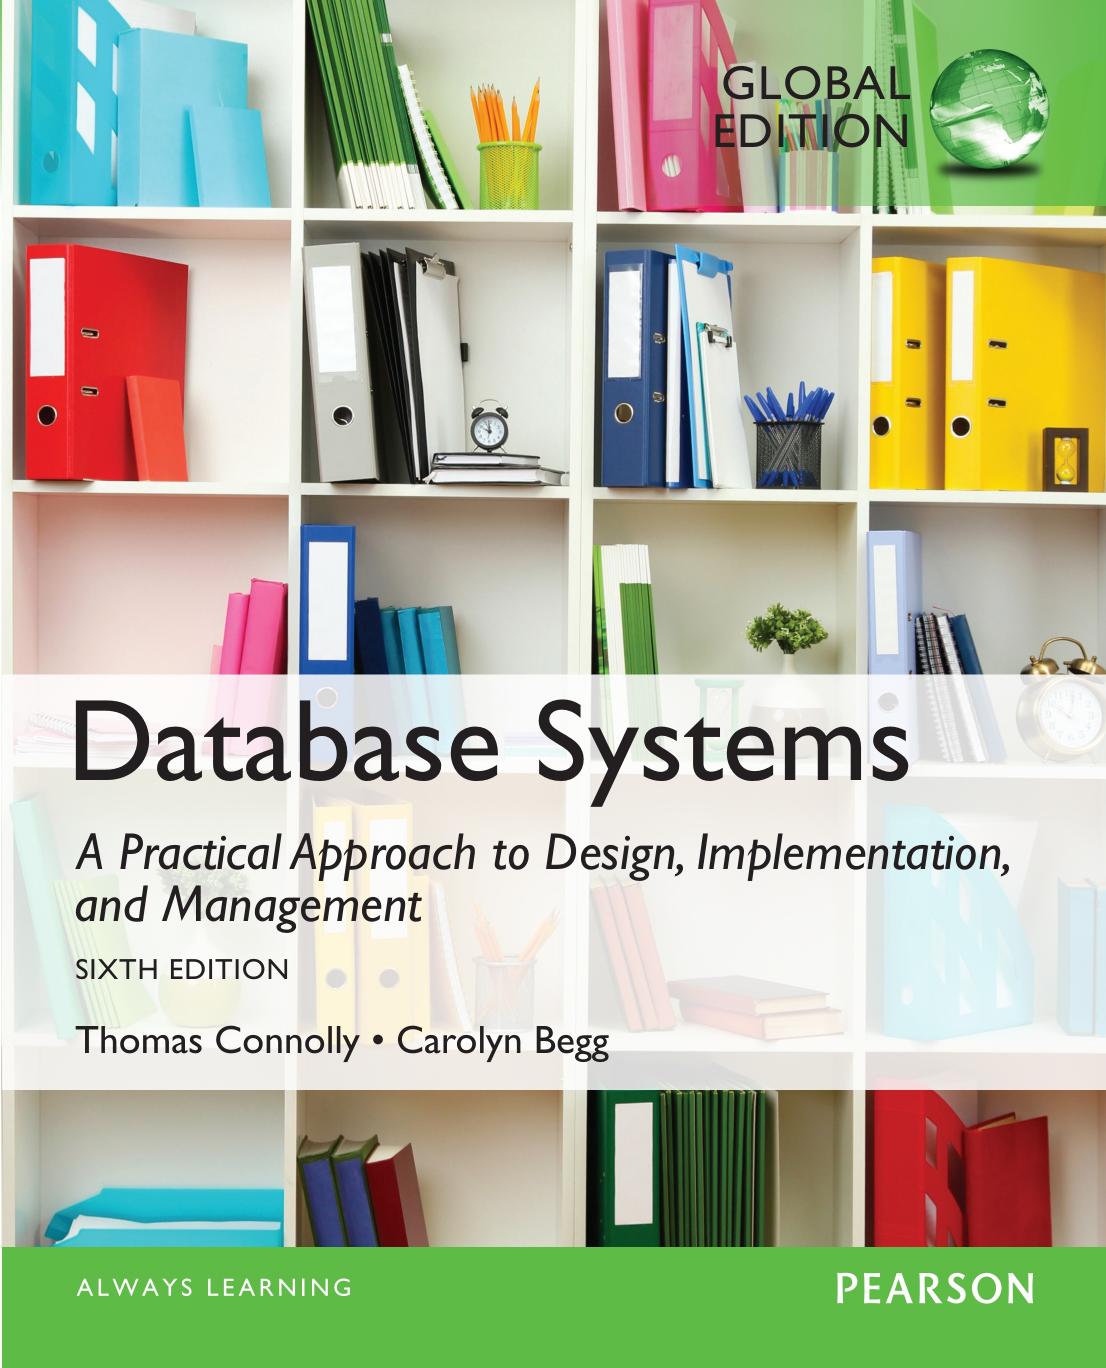 Database Systems A Practical Approach to Design Implementation and Management 6th global.jpg